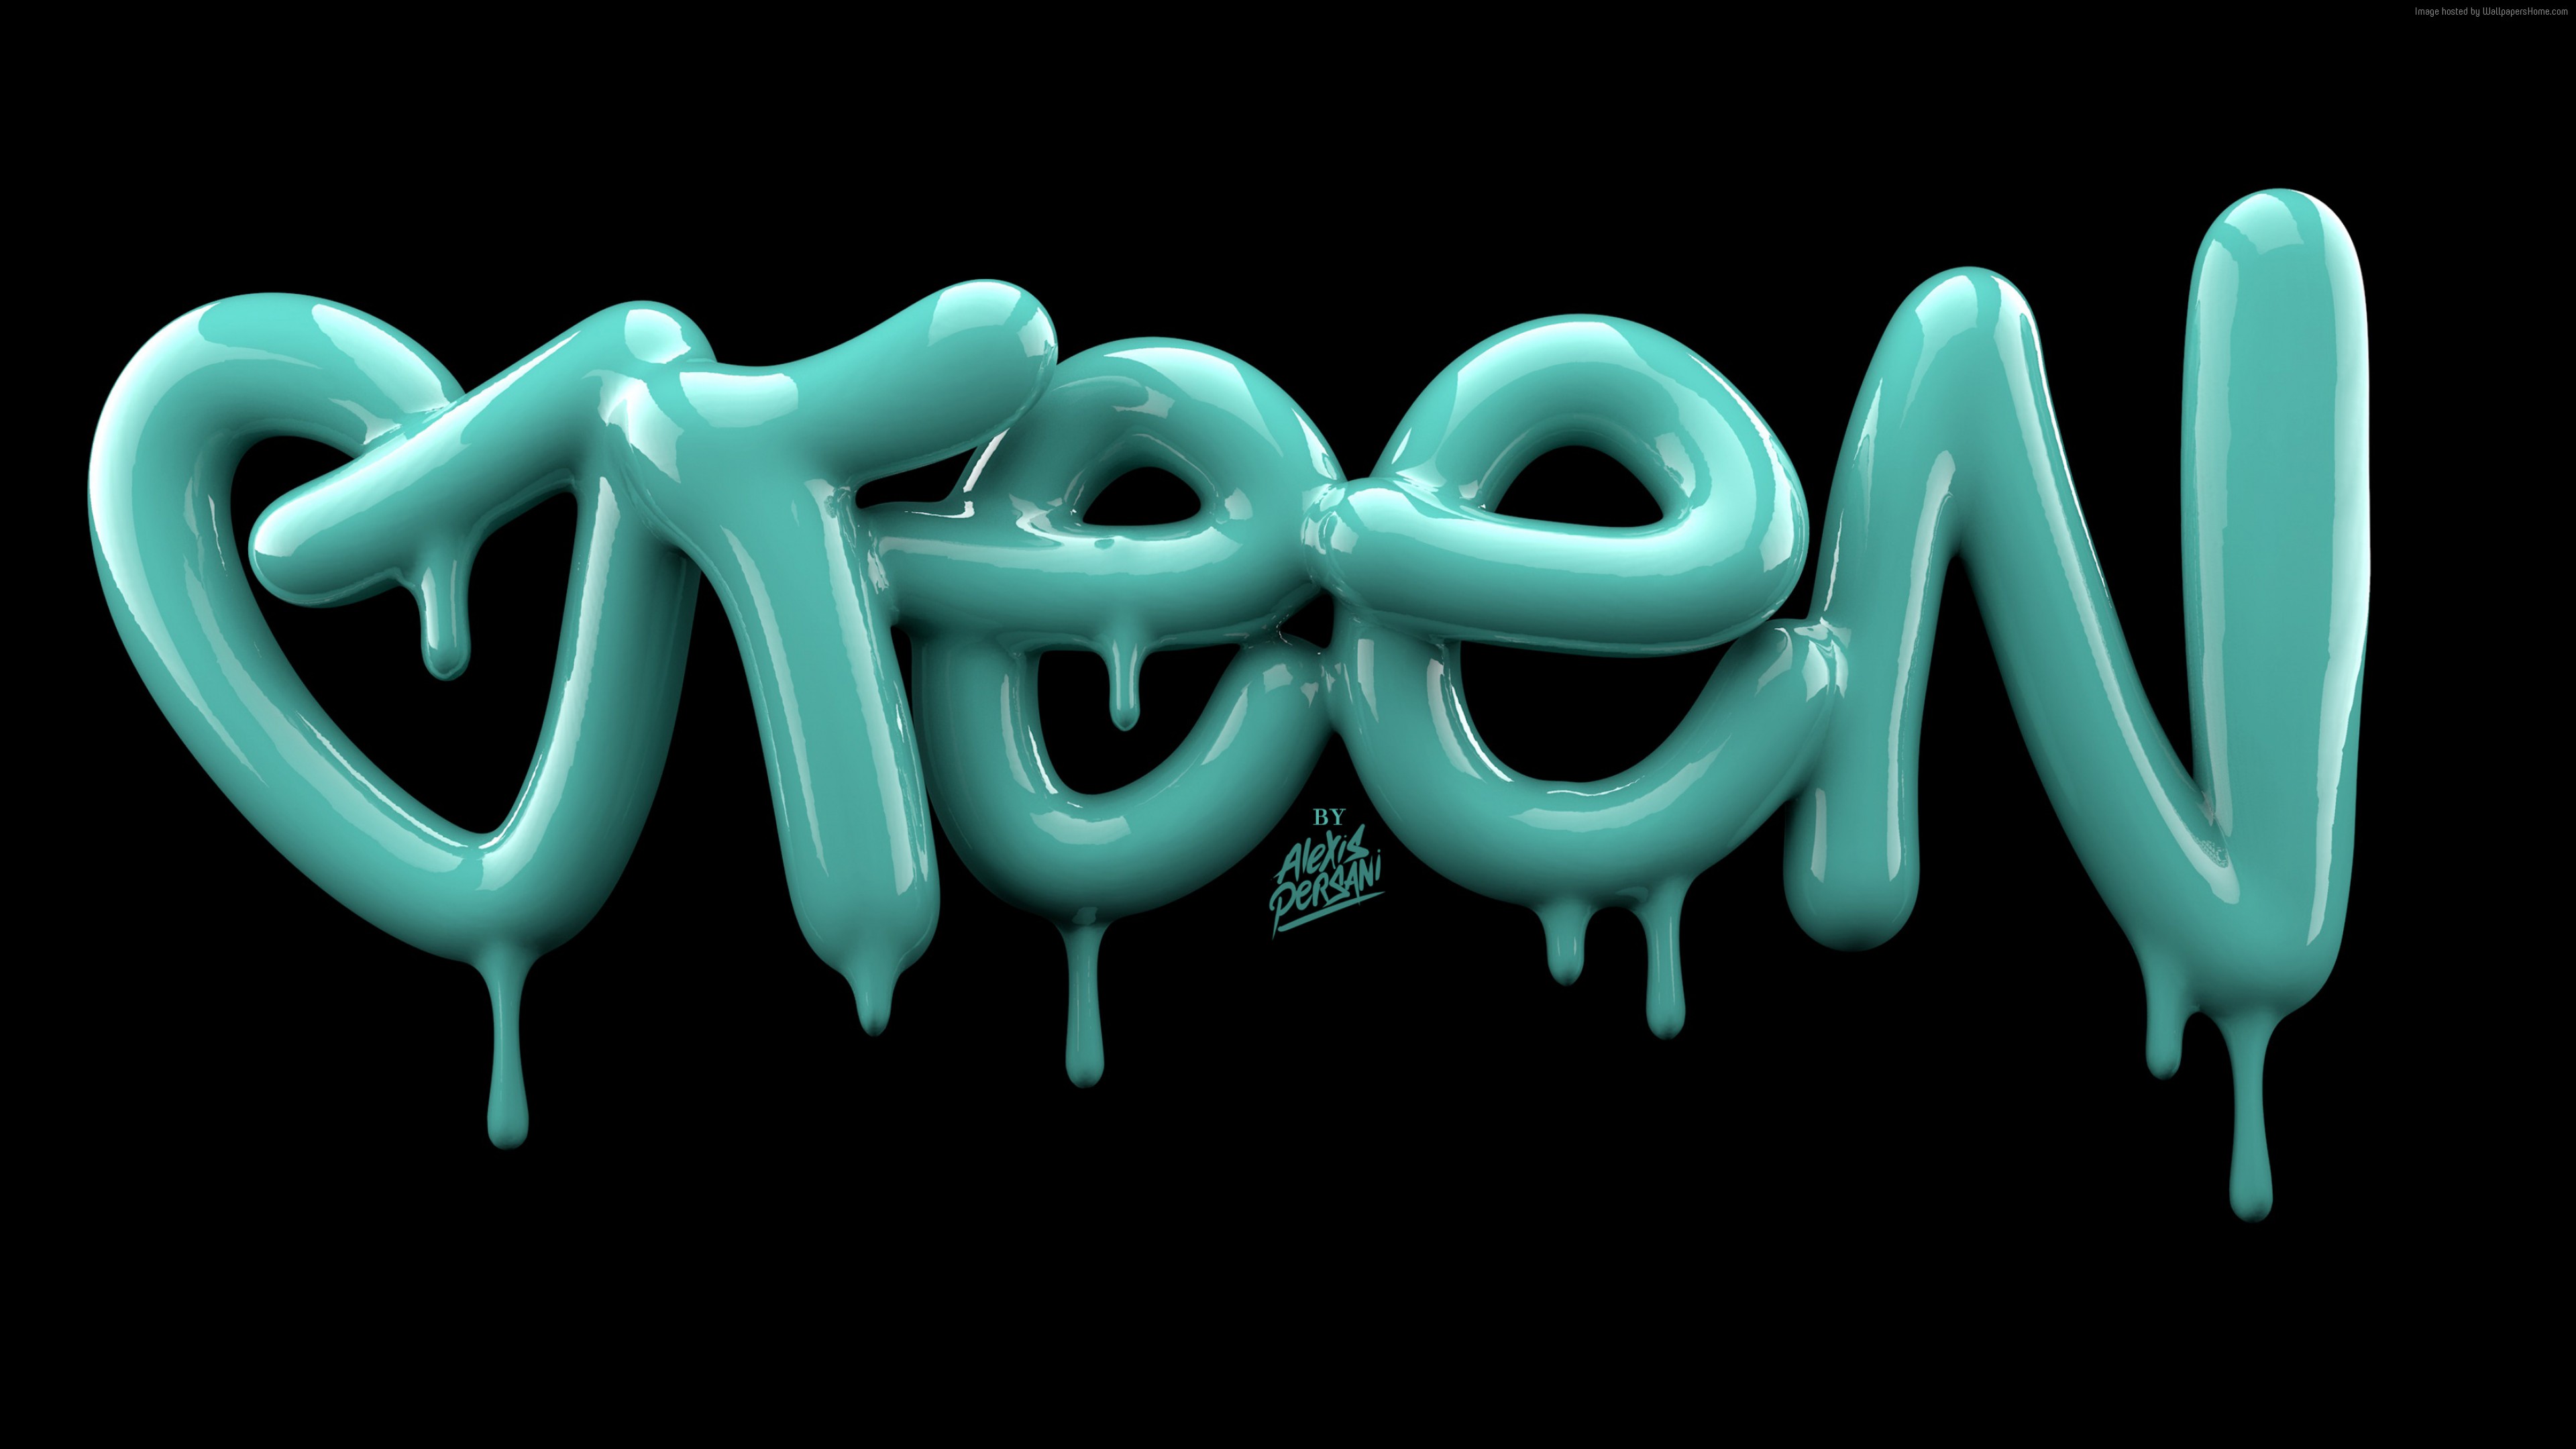 Wallpaper typography, abstract, 3D, green, 4k, Abstract 7432617389 - Wallpaper typography, abstract, 3D, green, 4k, Abstract - Typography, green, abstract, 4k, 3D